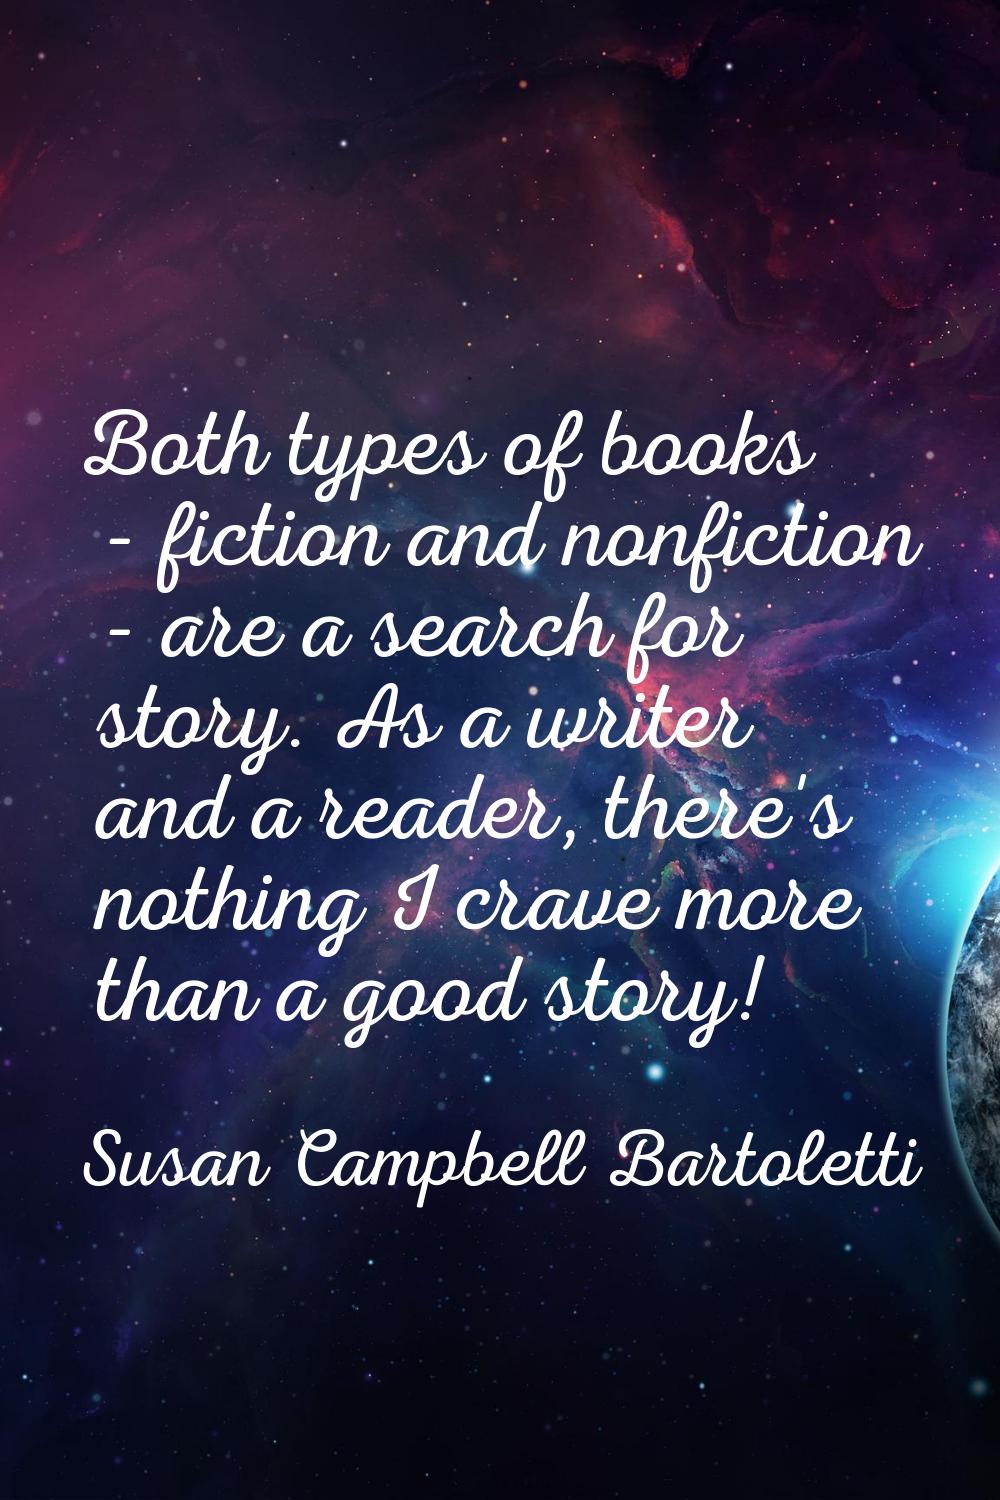 Both types of books - fiction and nonfiction - are a search for story. As a writer and a reader, th